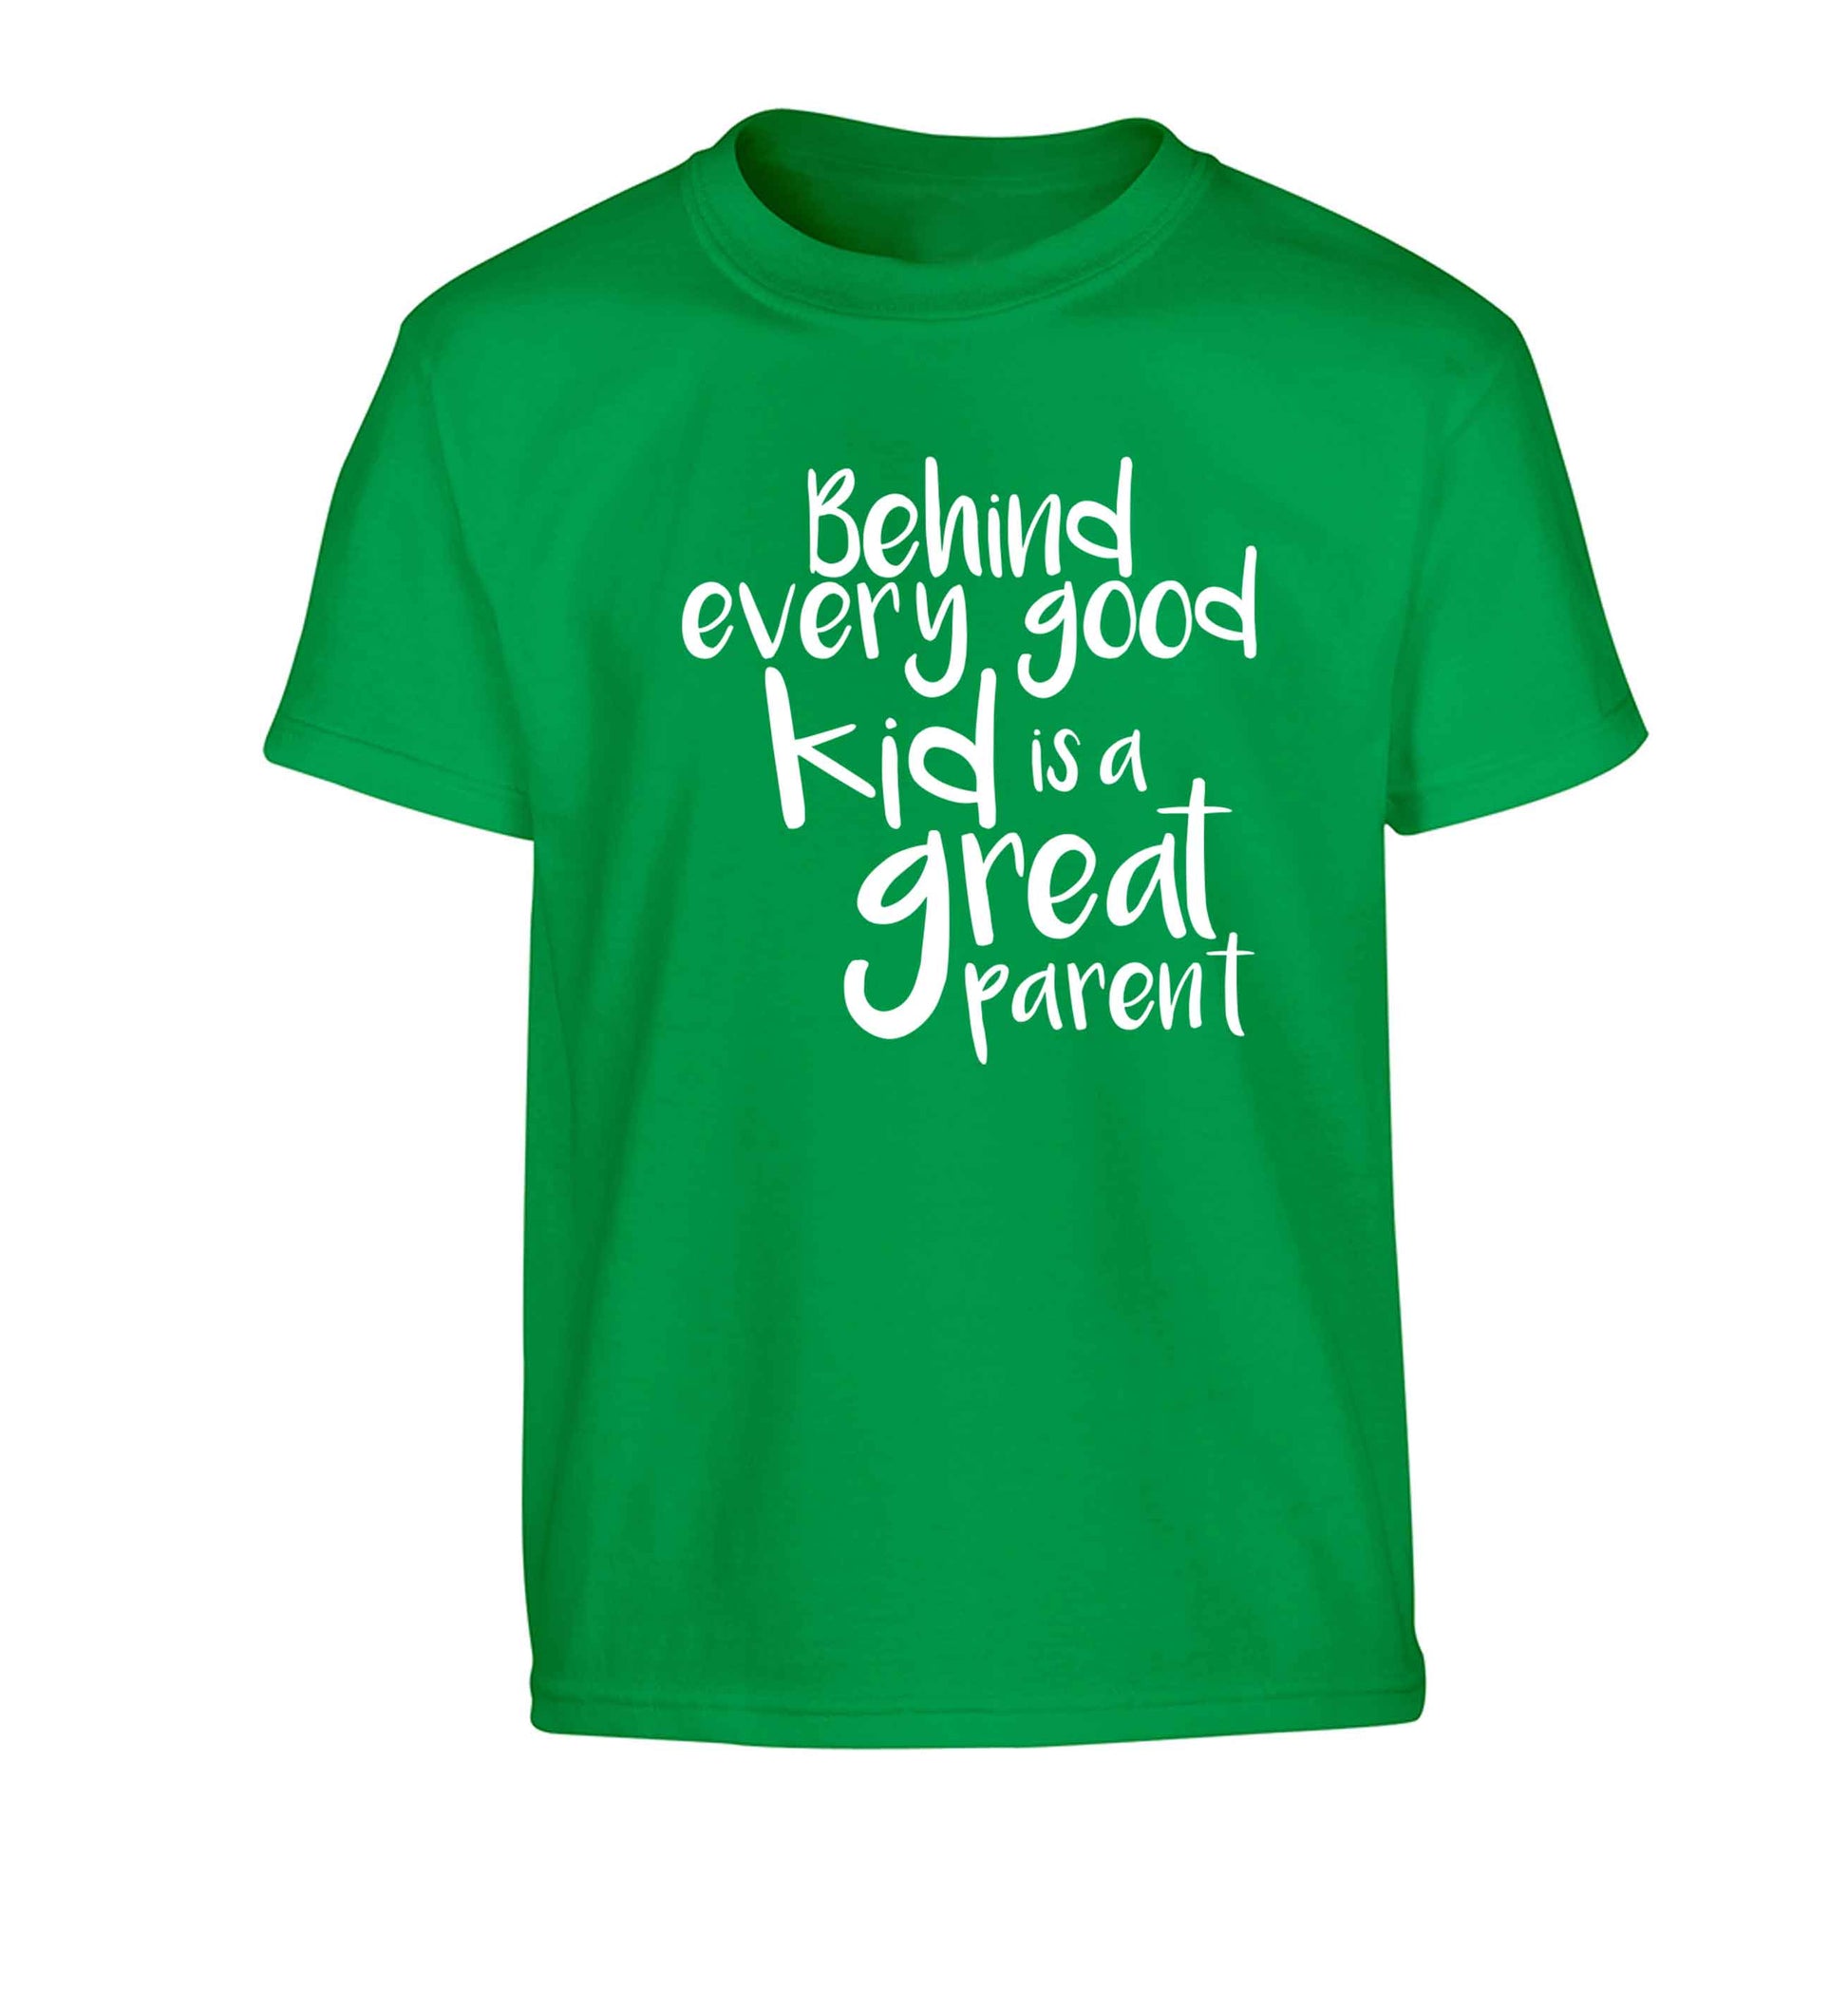 Behind every good kid is a great parent Children's green Tshirt 12-13 Years